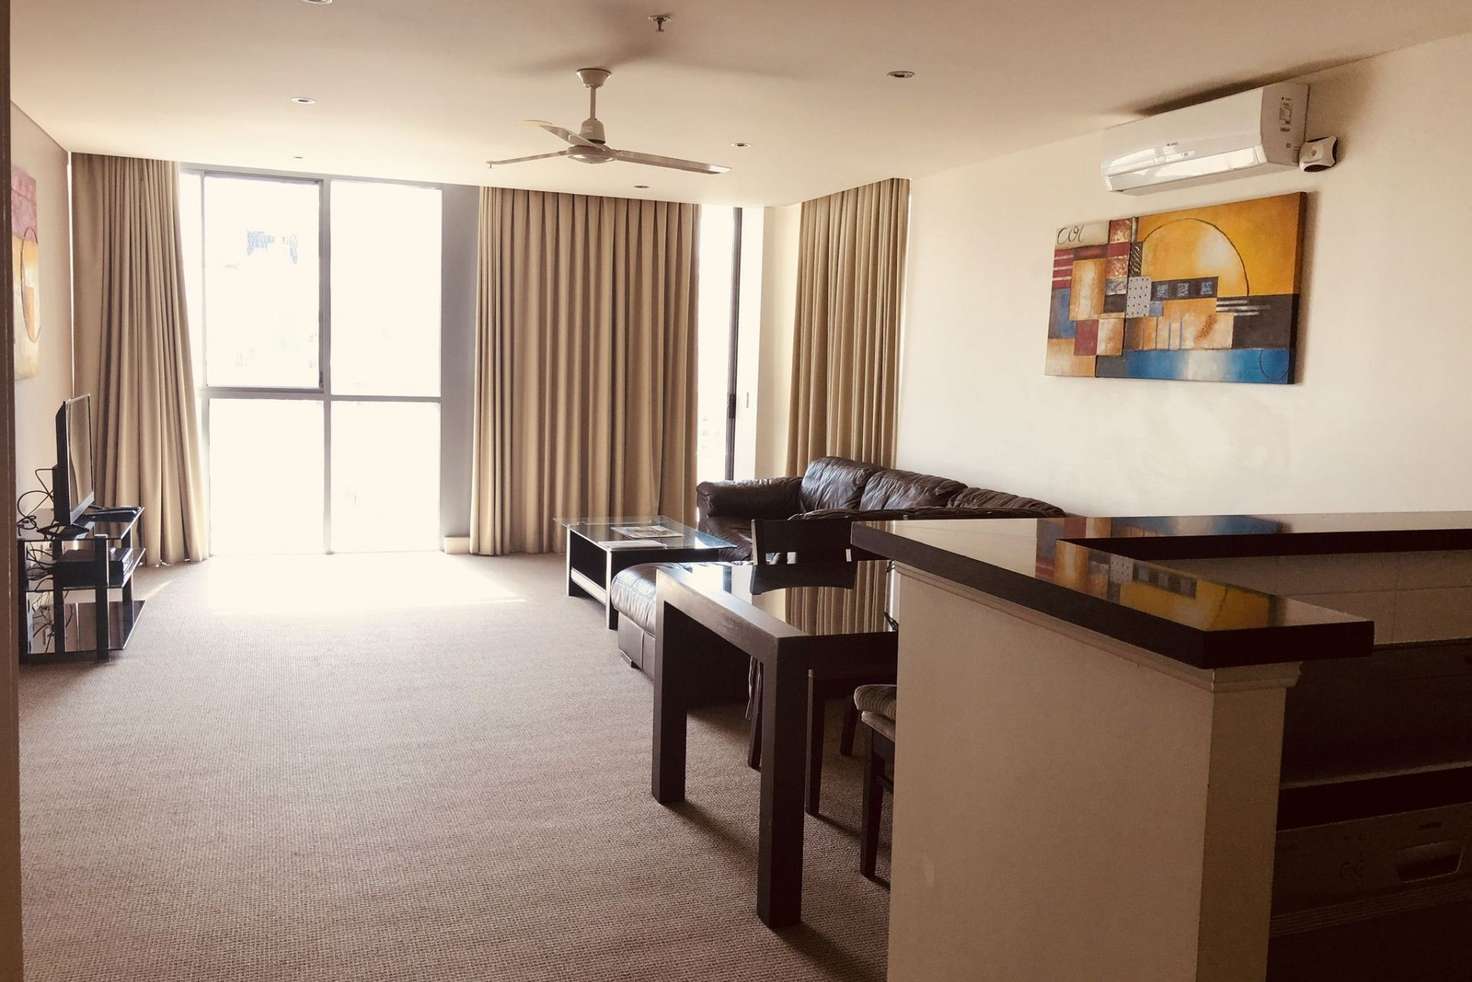 Main view of Homely apartment listing, 1501/18 Cypress Ave, Surfers Paradise QLD 4217